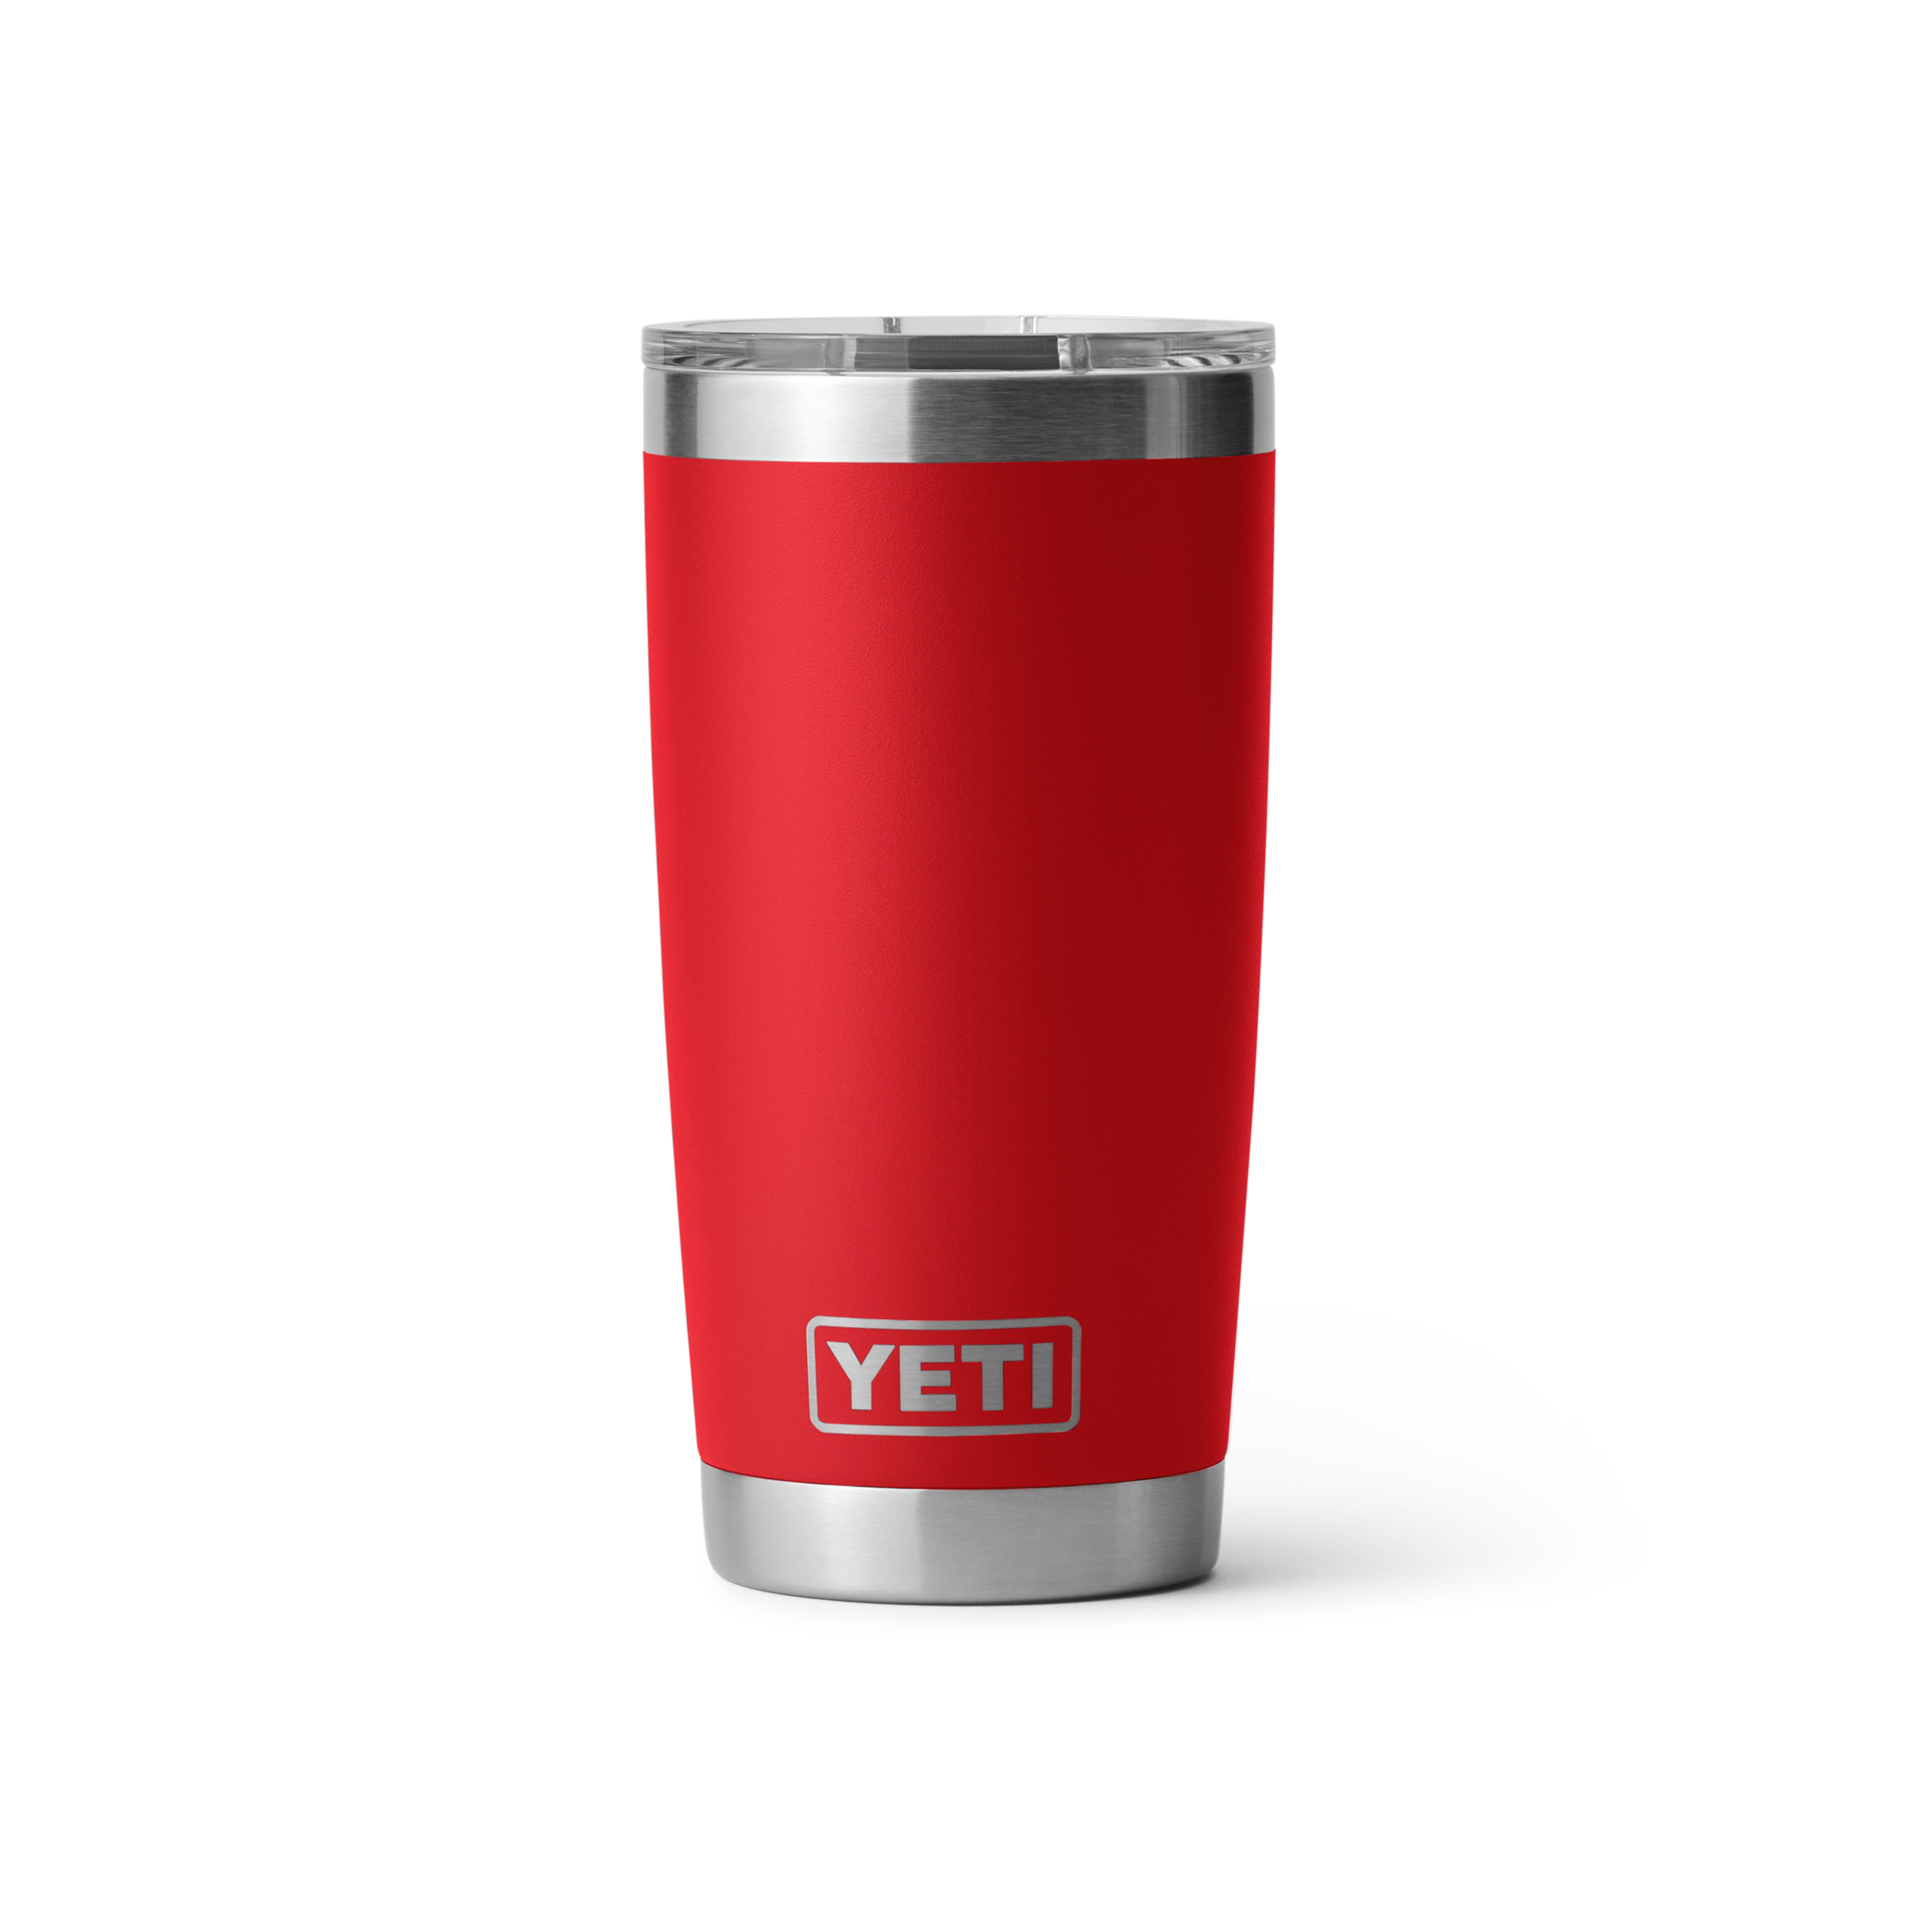 The New Camo YETI Ramblers, Available for a Limited Time